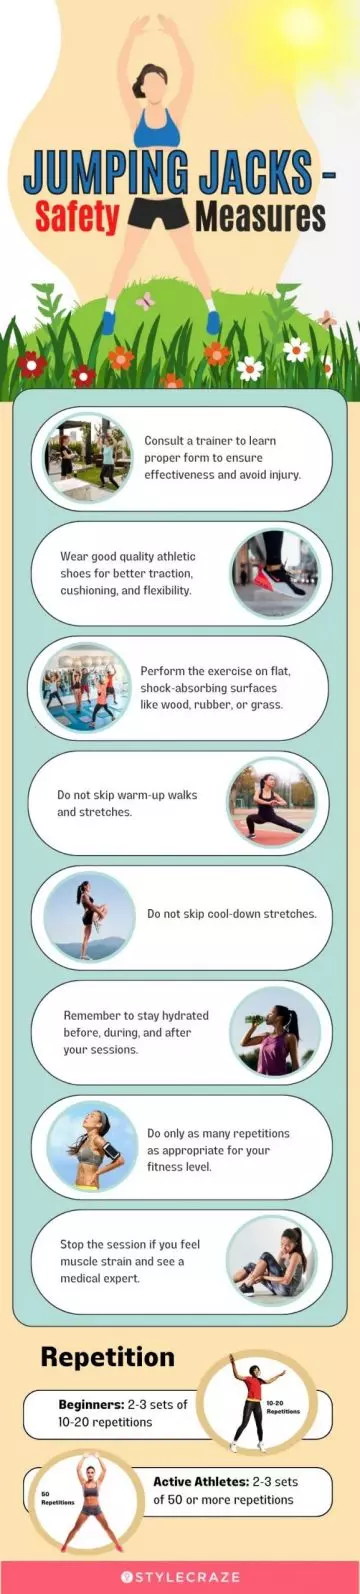 jumping jacks safety measures (infographic)